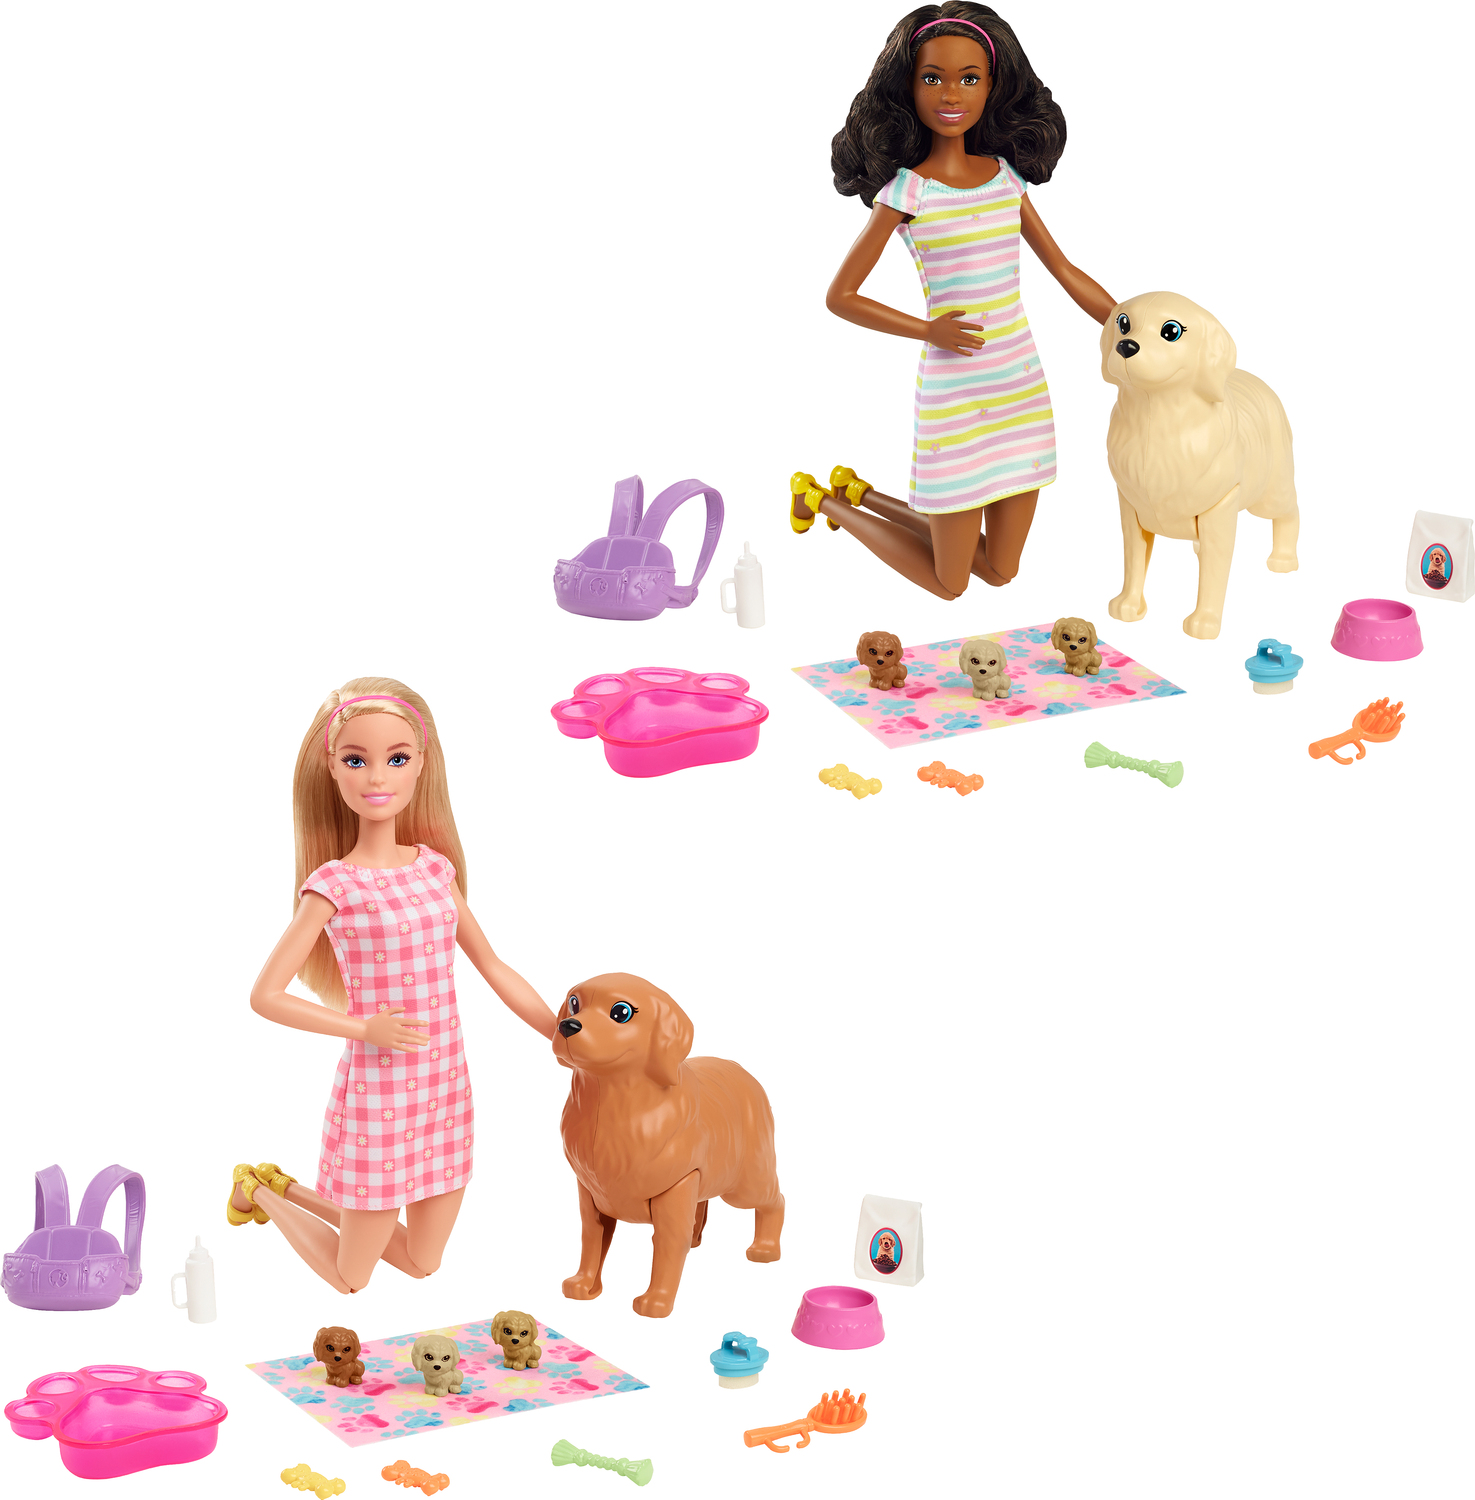 Barbie Extra Doll And Pet - HDJ45 - The Toy Box Hanover